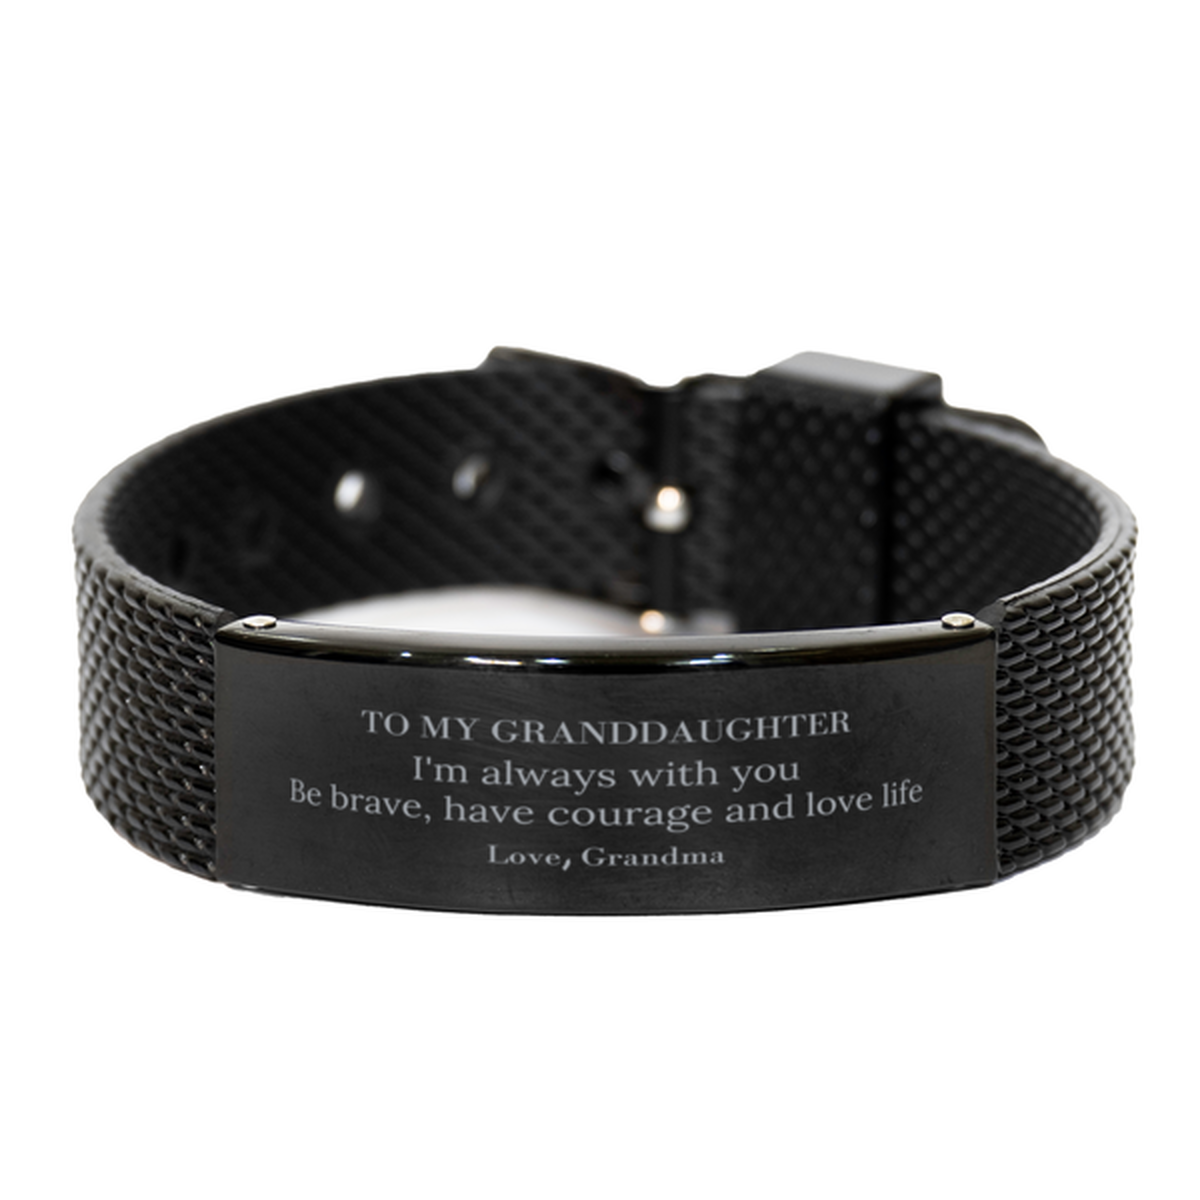 To My Granddaughter Gifts from Grandma, Unique Black Shark Mesh Bracelet Inspirational Christmas Birthday Graduation Gifts for Granddaughter I'm always with you. Be brave, have courage and love life. Love, Grandma